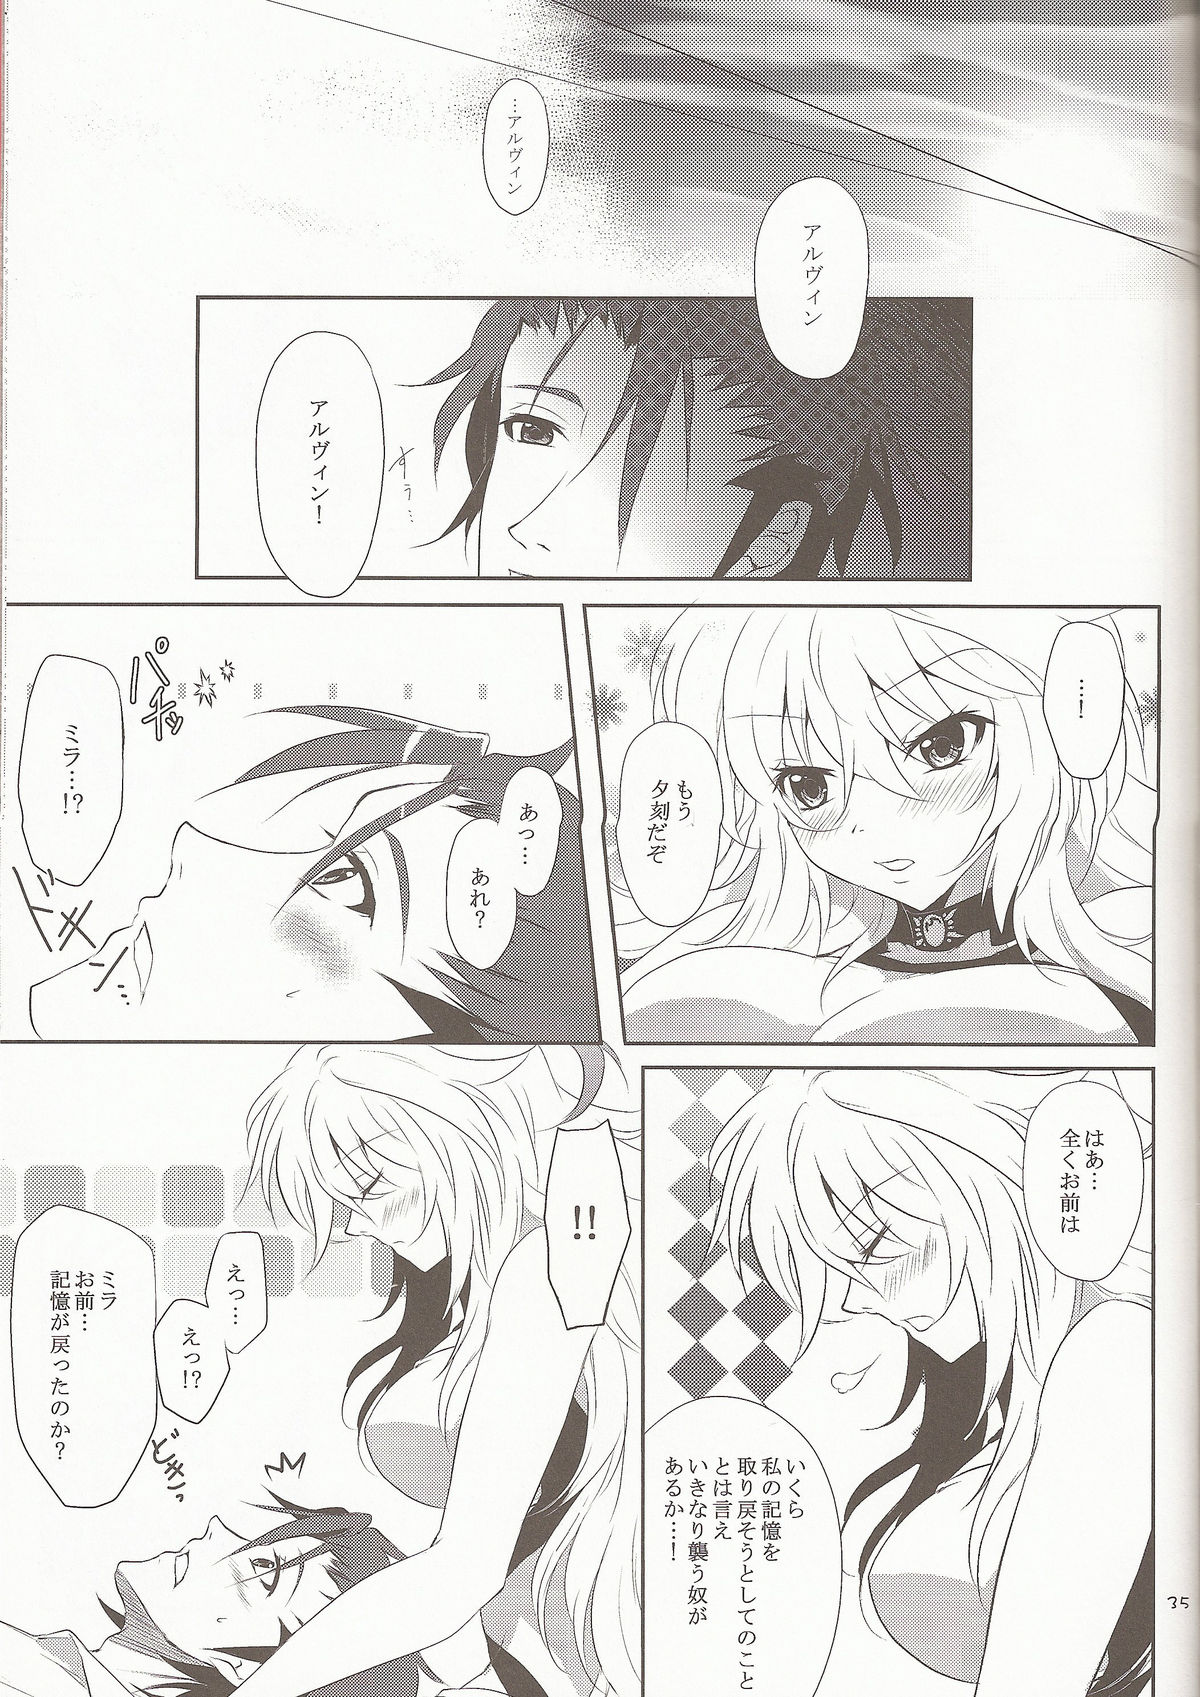 (C81) [Petica (Mikamikan)] External Link (Tales of Xillia) page 35 full